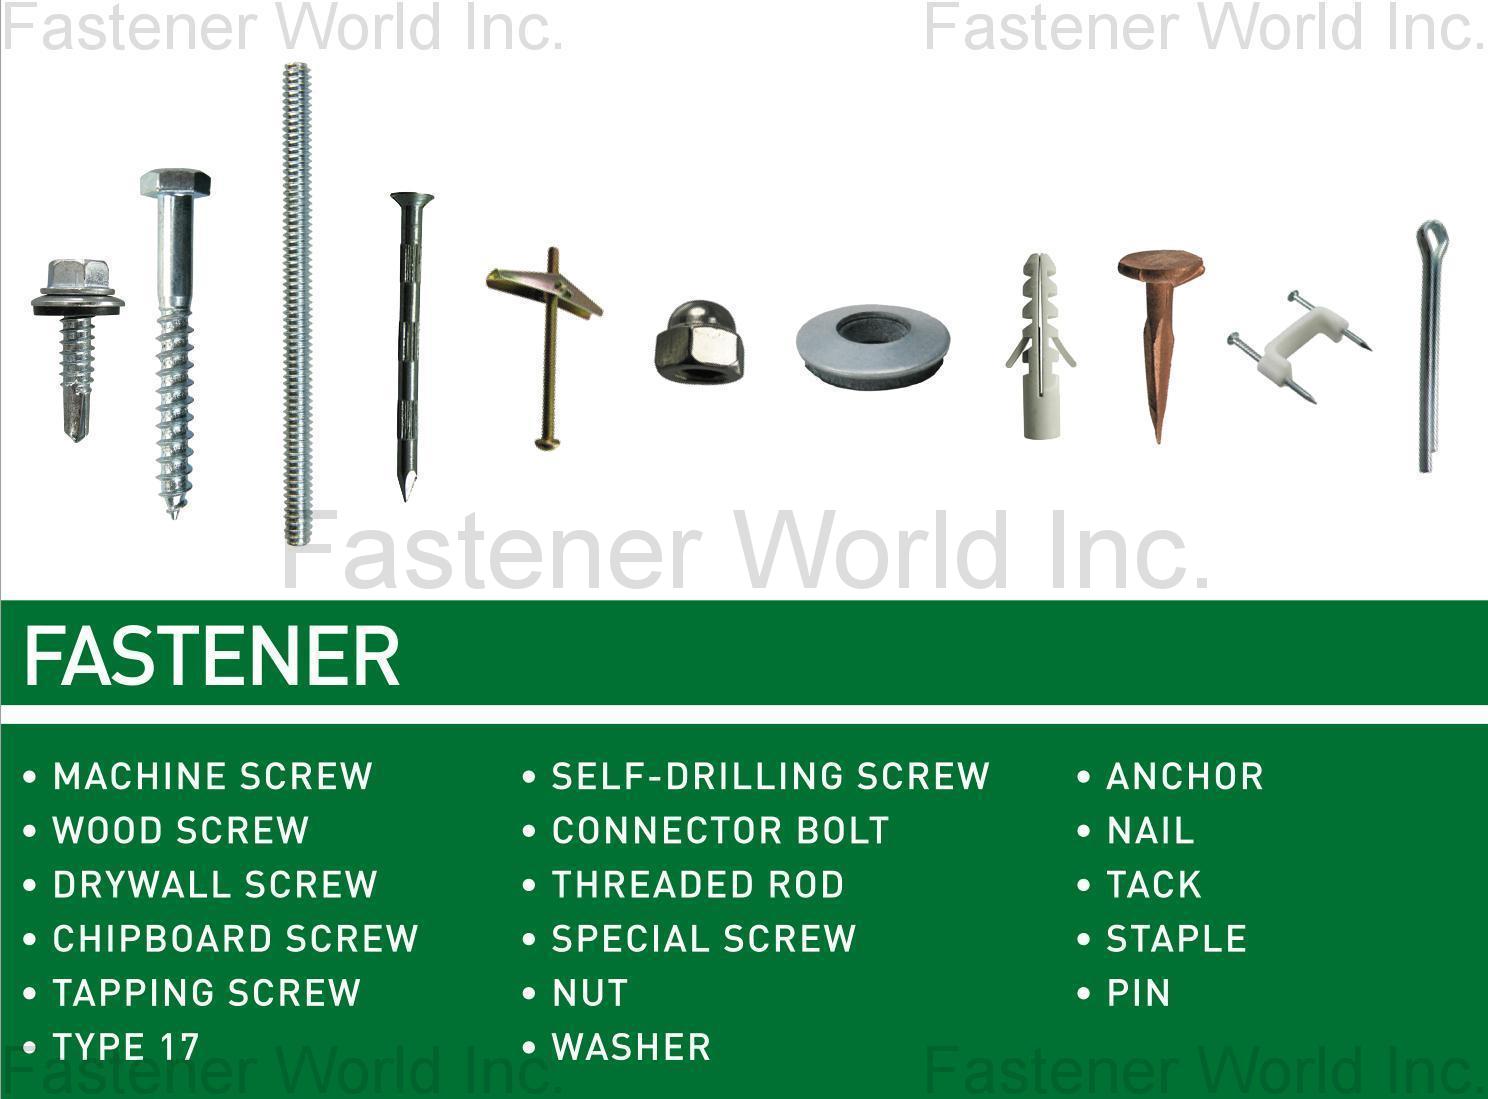 FAITHFUL ENG. PRODS. CO., LTD.  , FASTENER, MACHINE SCREW, WOOD SCREW, DRYWALL SCREW, CHIPBOARD SCREW, TAPPING SCREW, TYPE 17, SELF-DRILLING SCREW, CONNECTOR BOLT, THREADED ROD, SPECIAL SCREW, NUT, WASHER, ANCHOR, NAIL, TACK, STAPLE, PIN , All Kinds of Screws